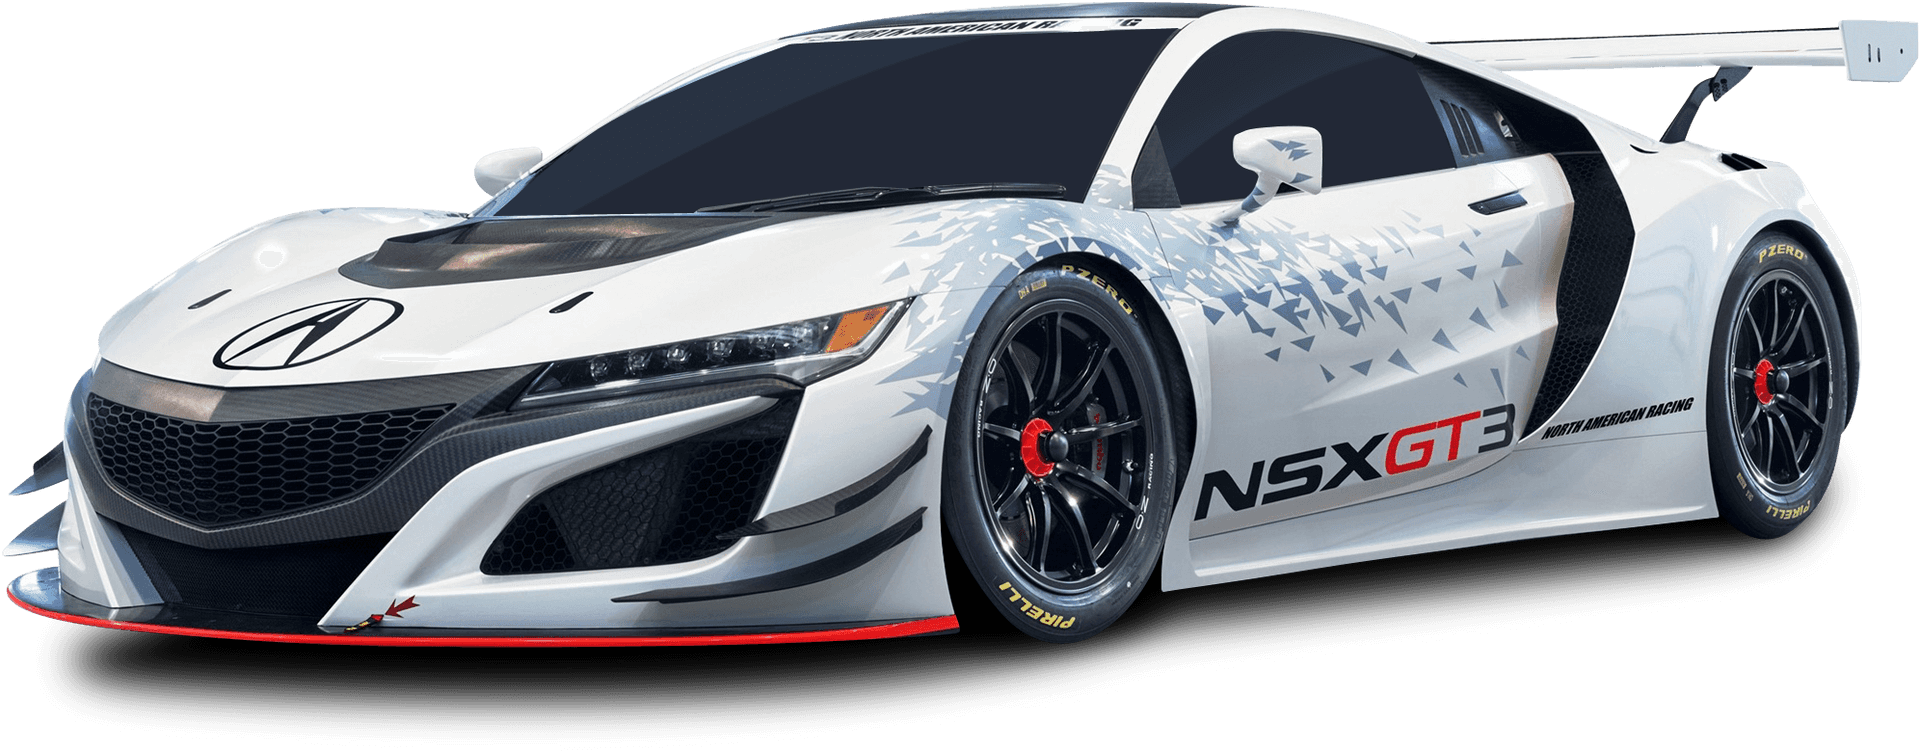 Acura N S X G T3 Racing Sports Car PNG